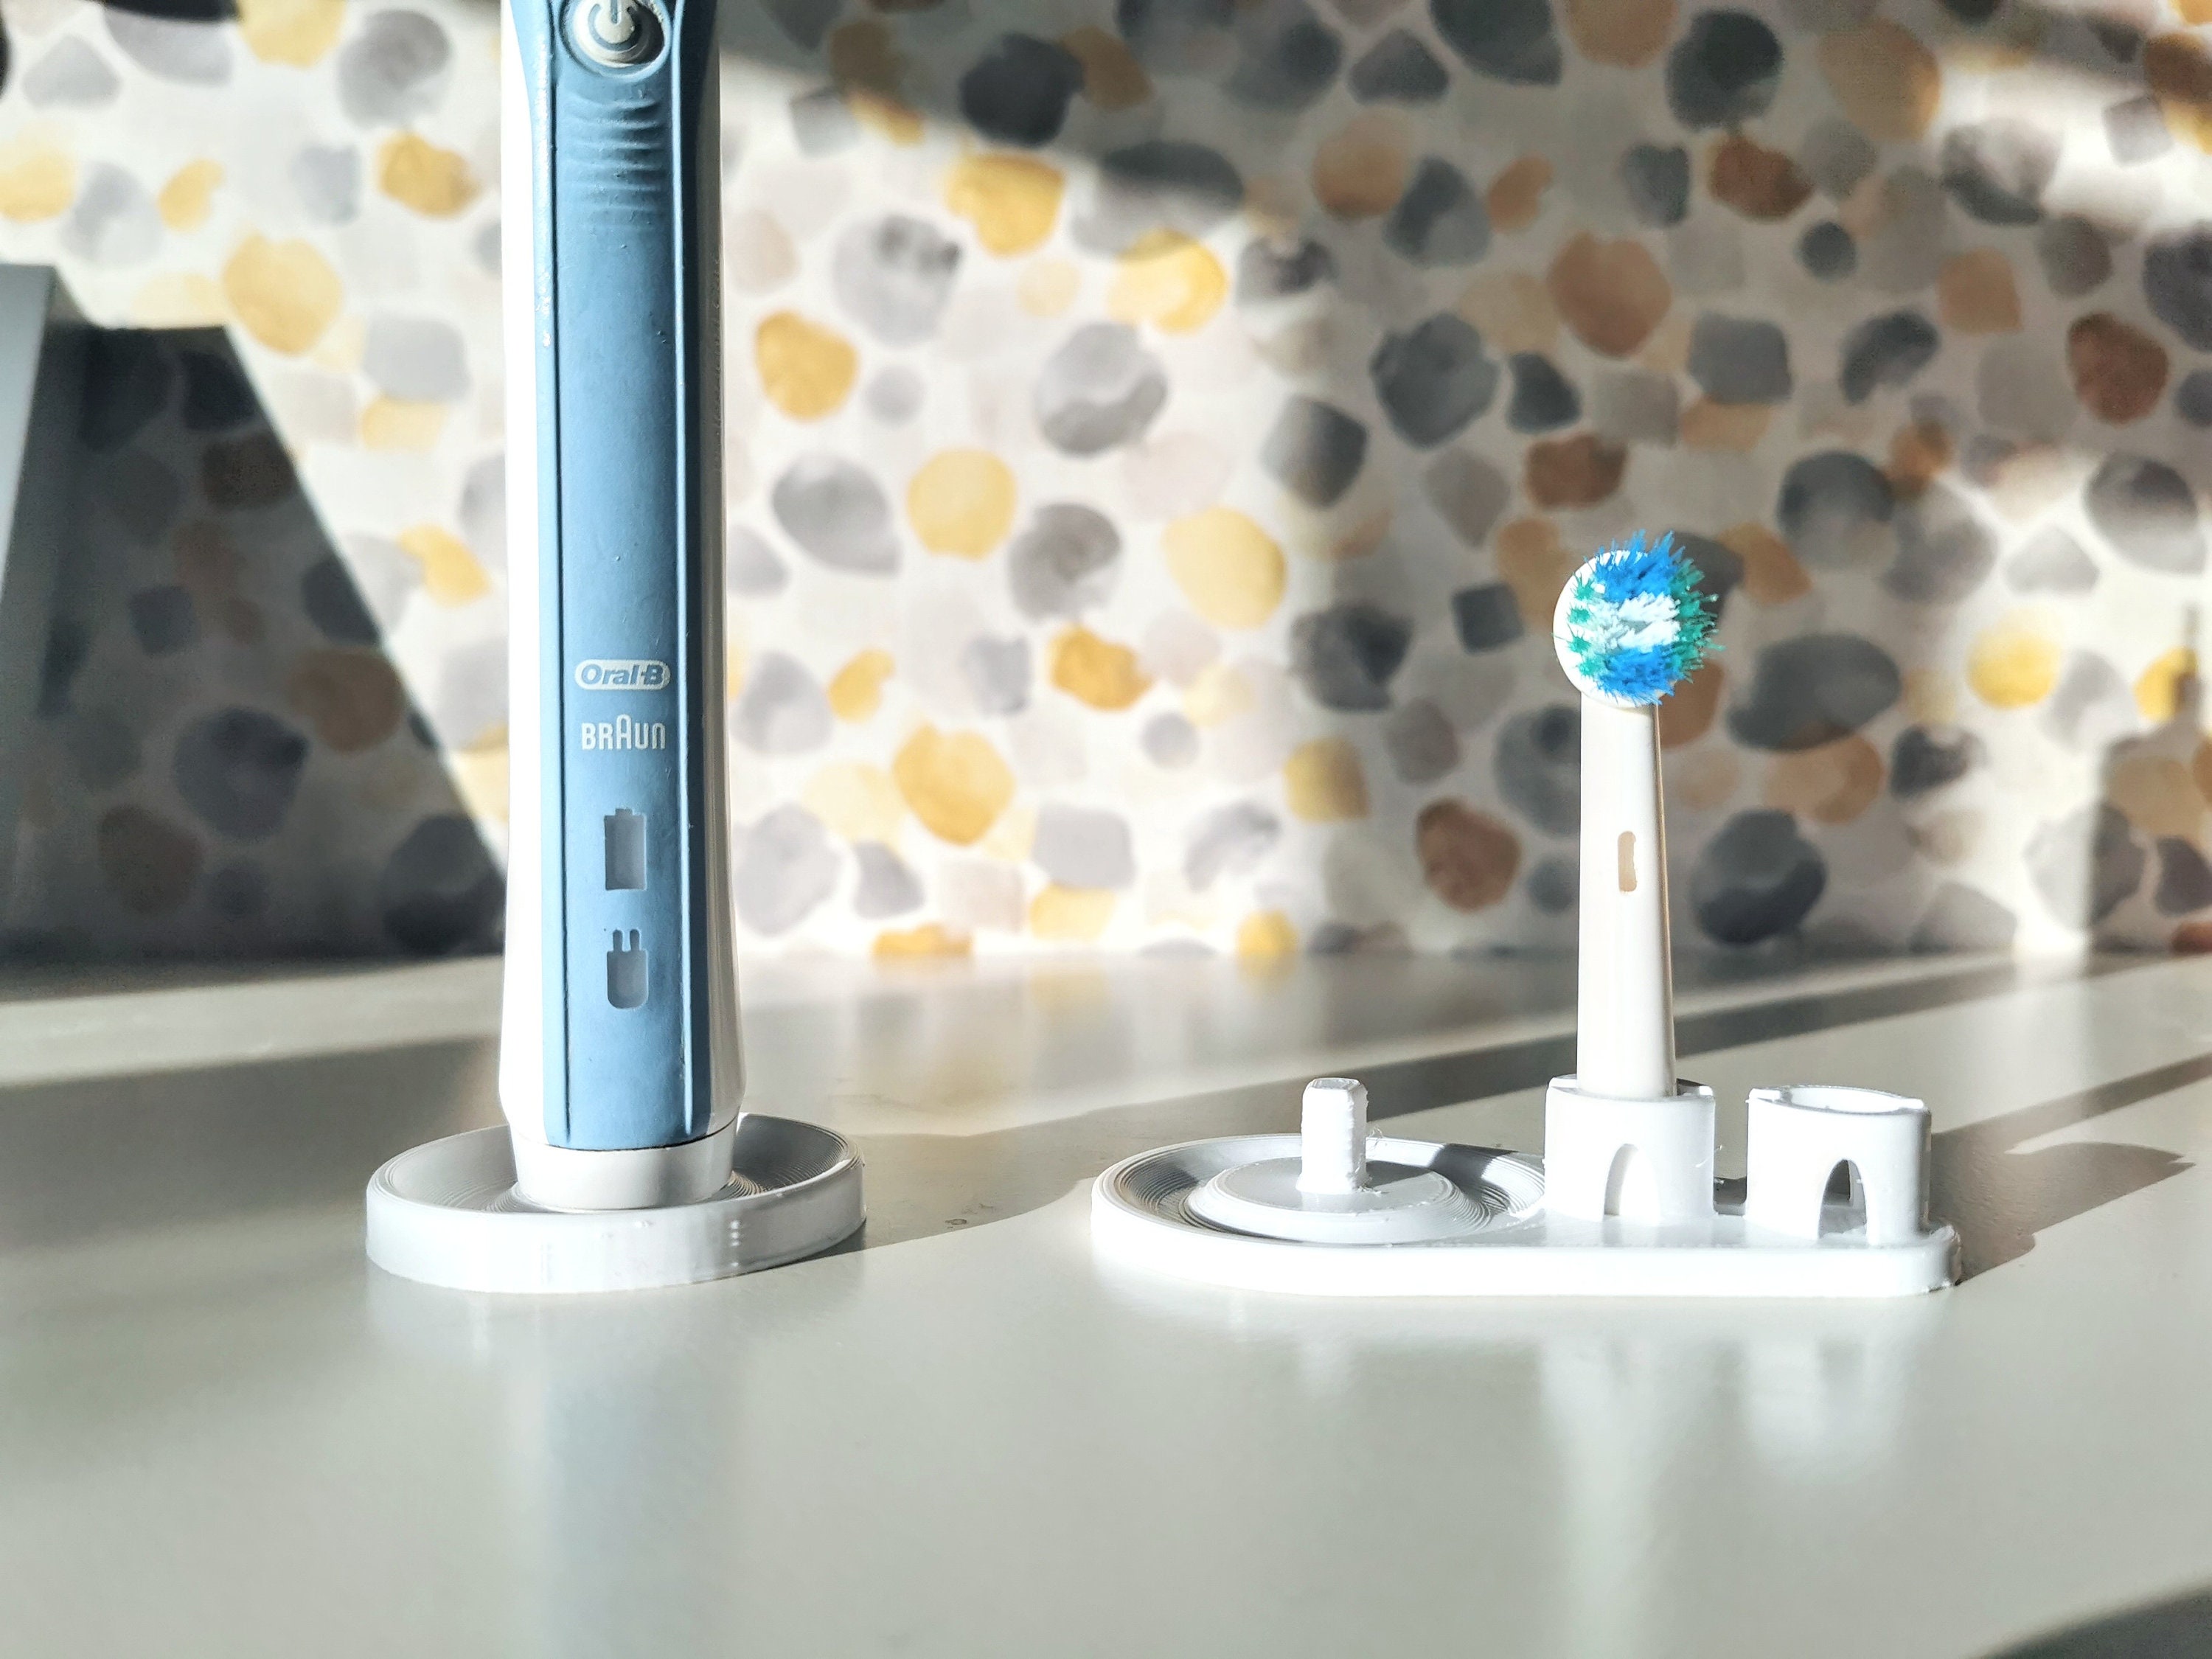 Oral-b Electric Toothbrush 1,2,3 Stand/holder With Drip Tray Toothbrush  Head Holder Mess Free 